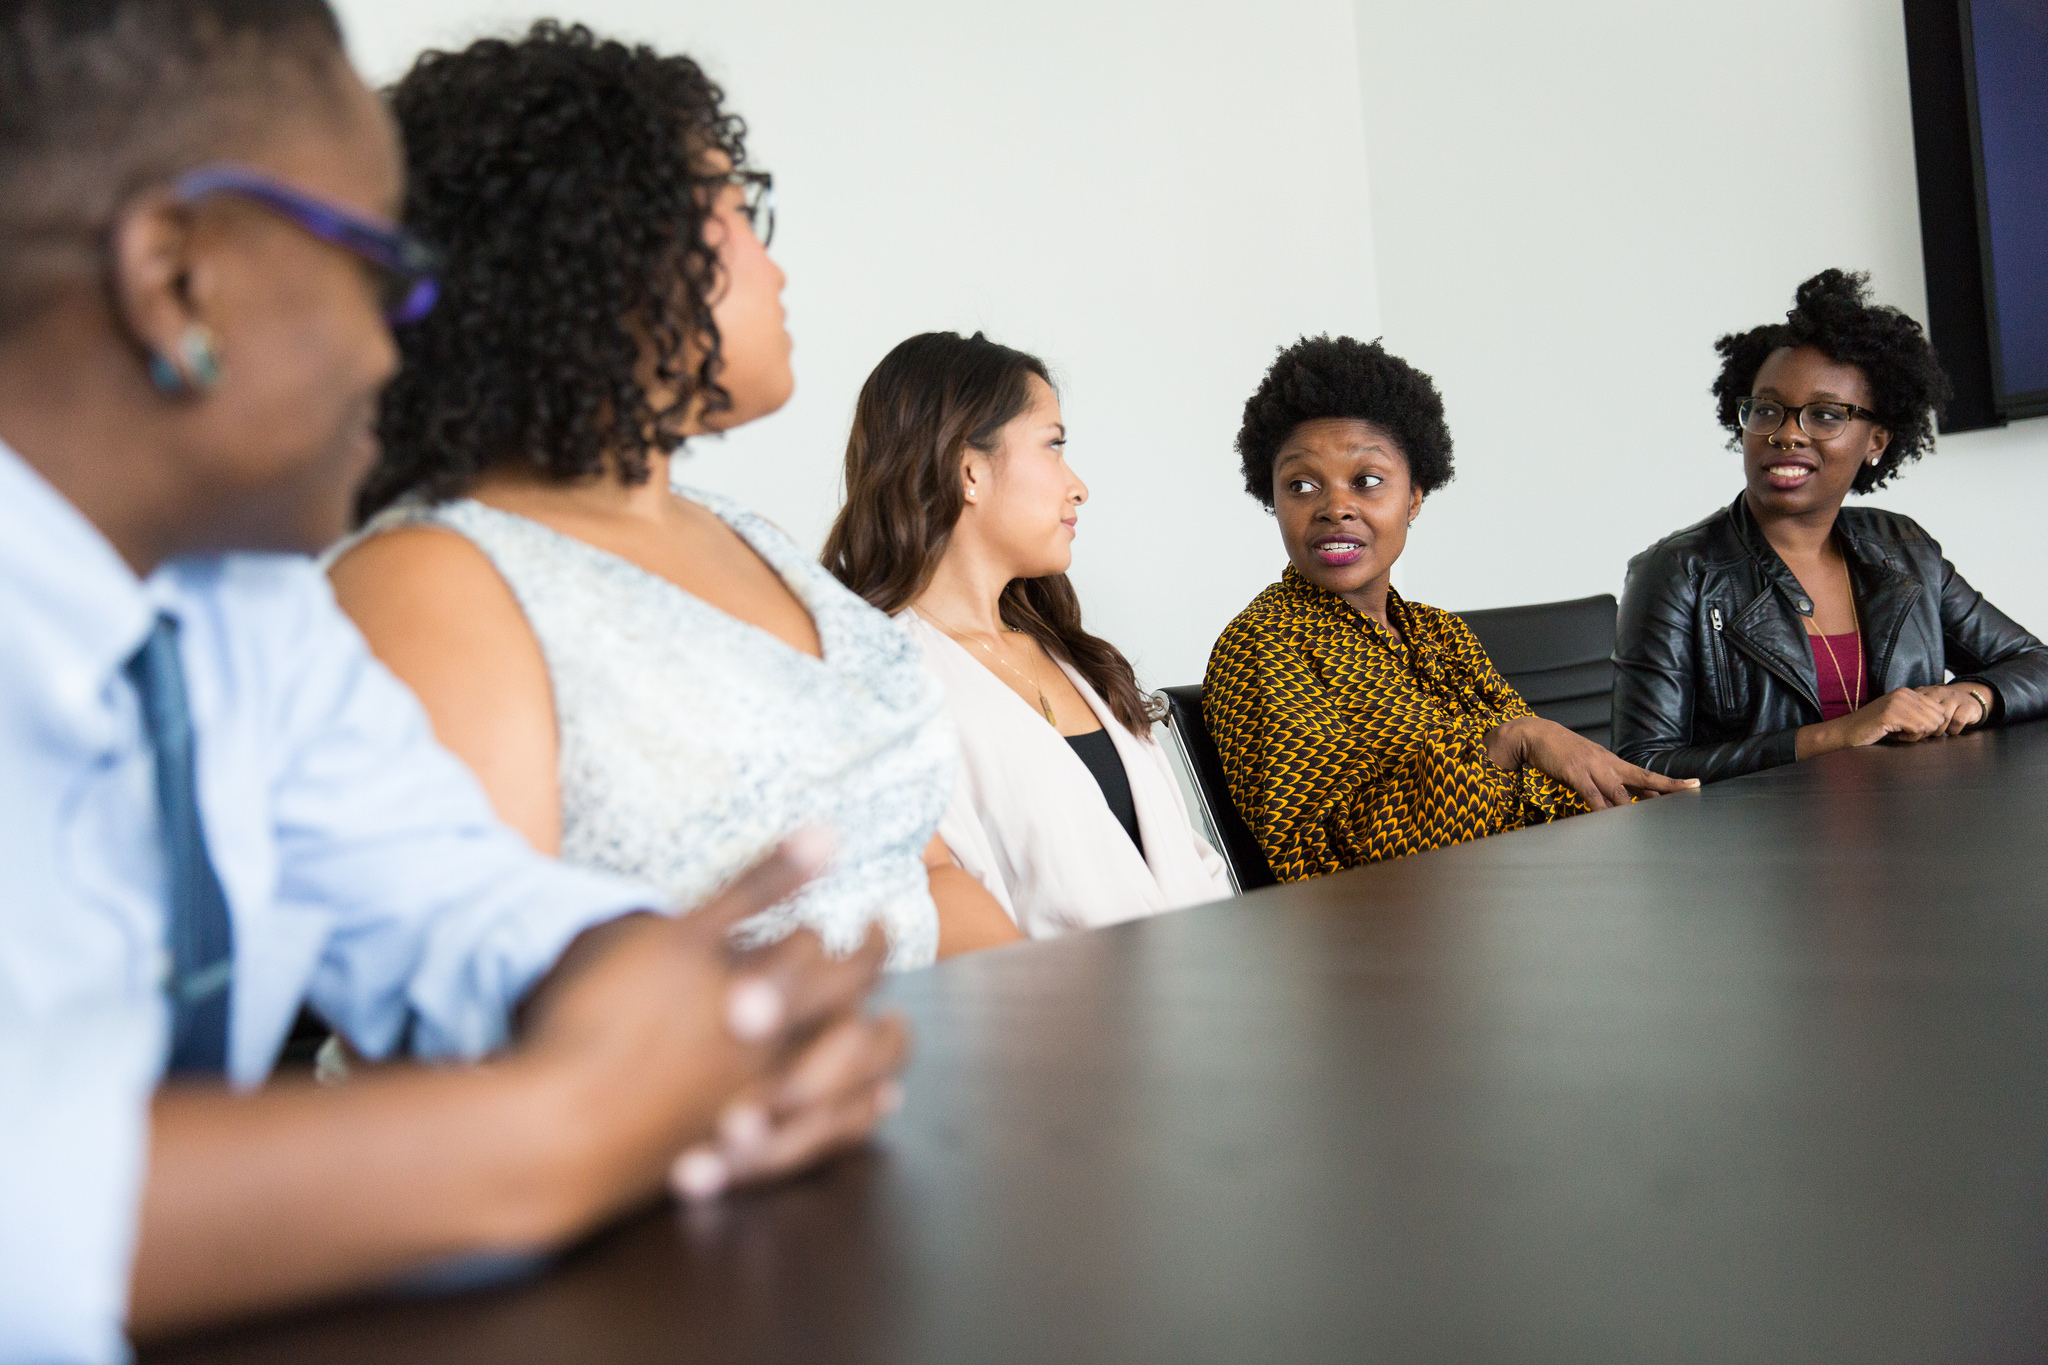 Stock Photo of Several Women of Color Sitting at a Conference Table